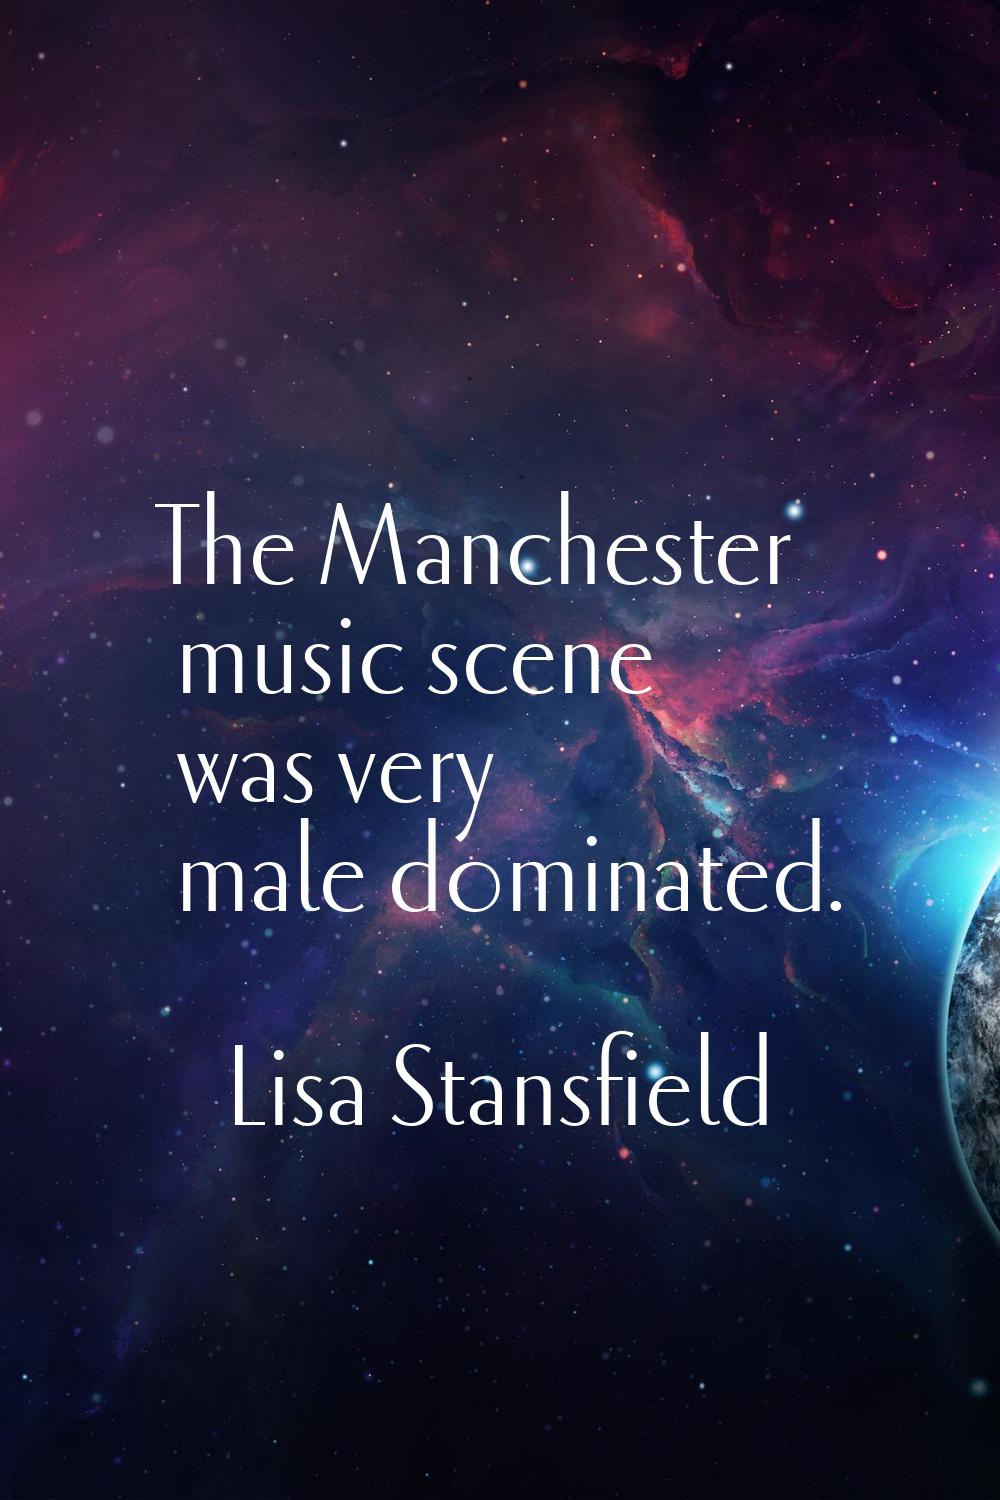 The Manchester music scene was very male dominated.